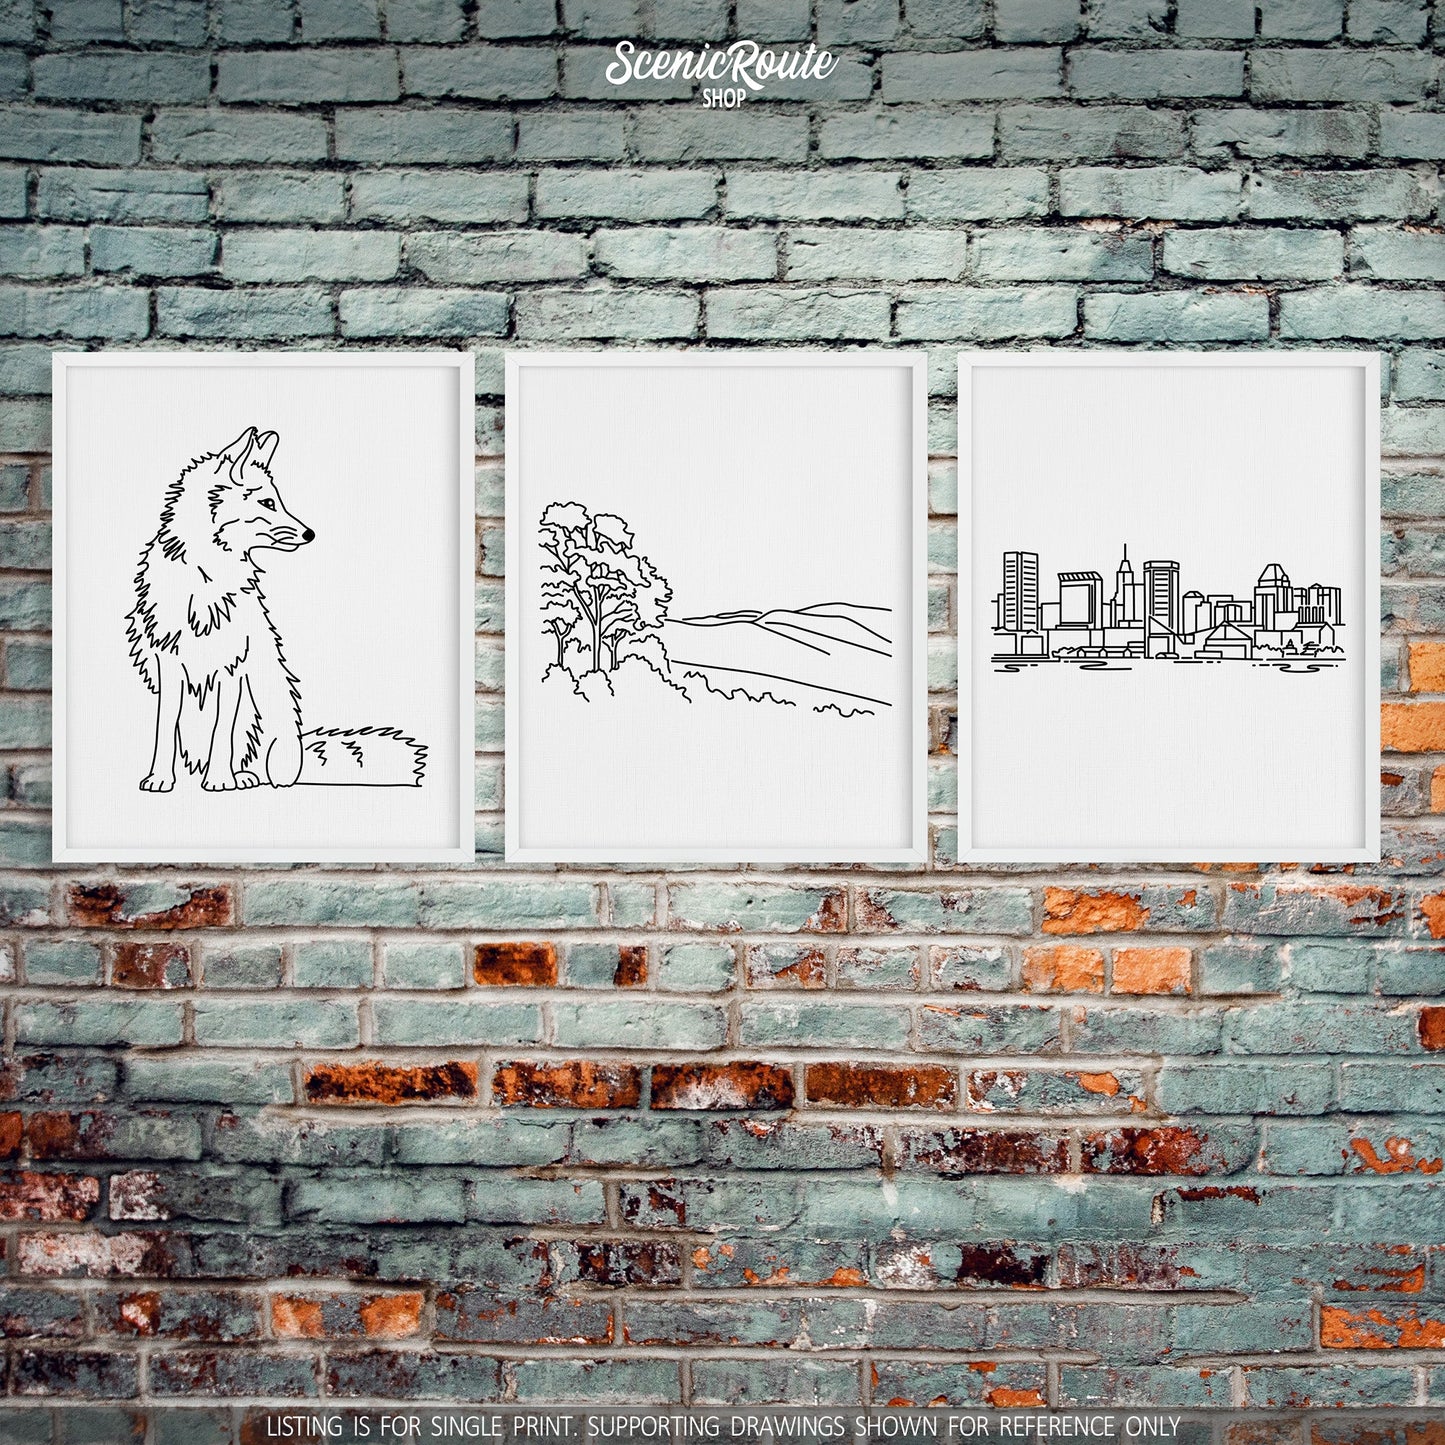 A group of three framed drawings on a brick wall. The line art drawings include a Fox, Shenandoah National Park, and the Baltimore Skyline